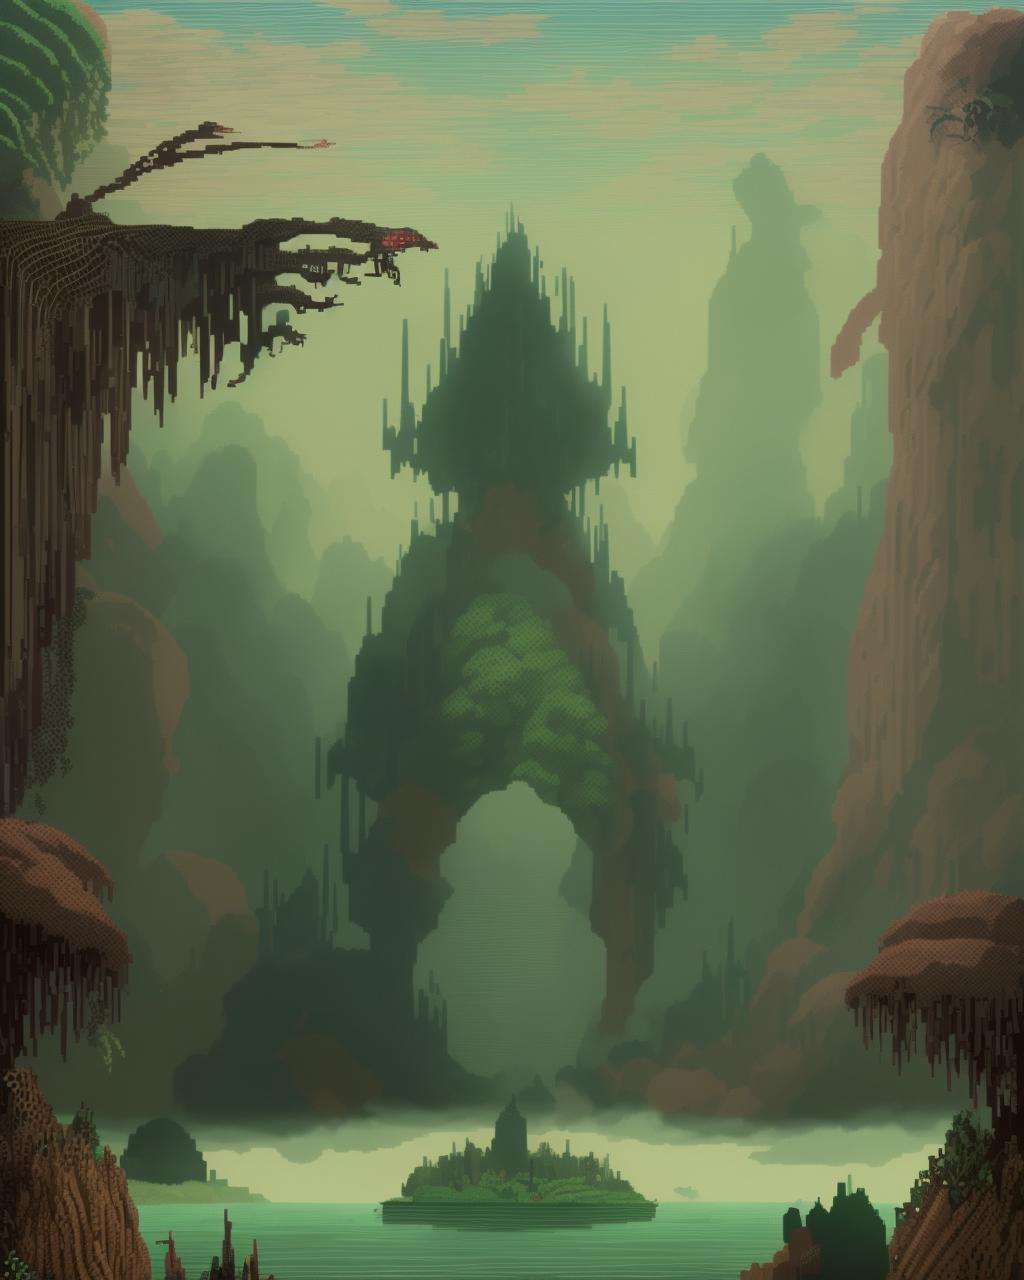 -A surreal, dreamlike sequence set in a bizarre, otherworldly landscape. The scene is filled with intricate details and features a vivid, surreal color palette. , pixel art